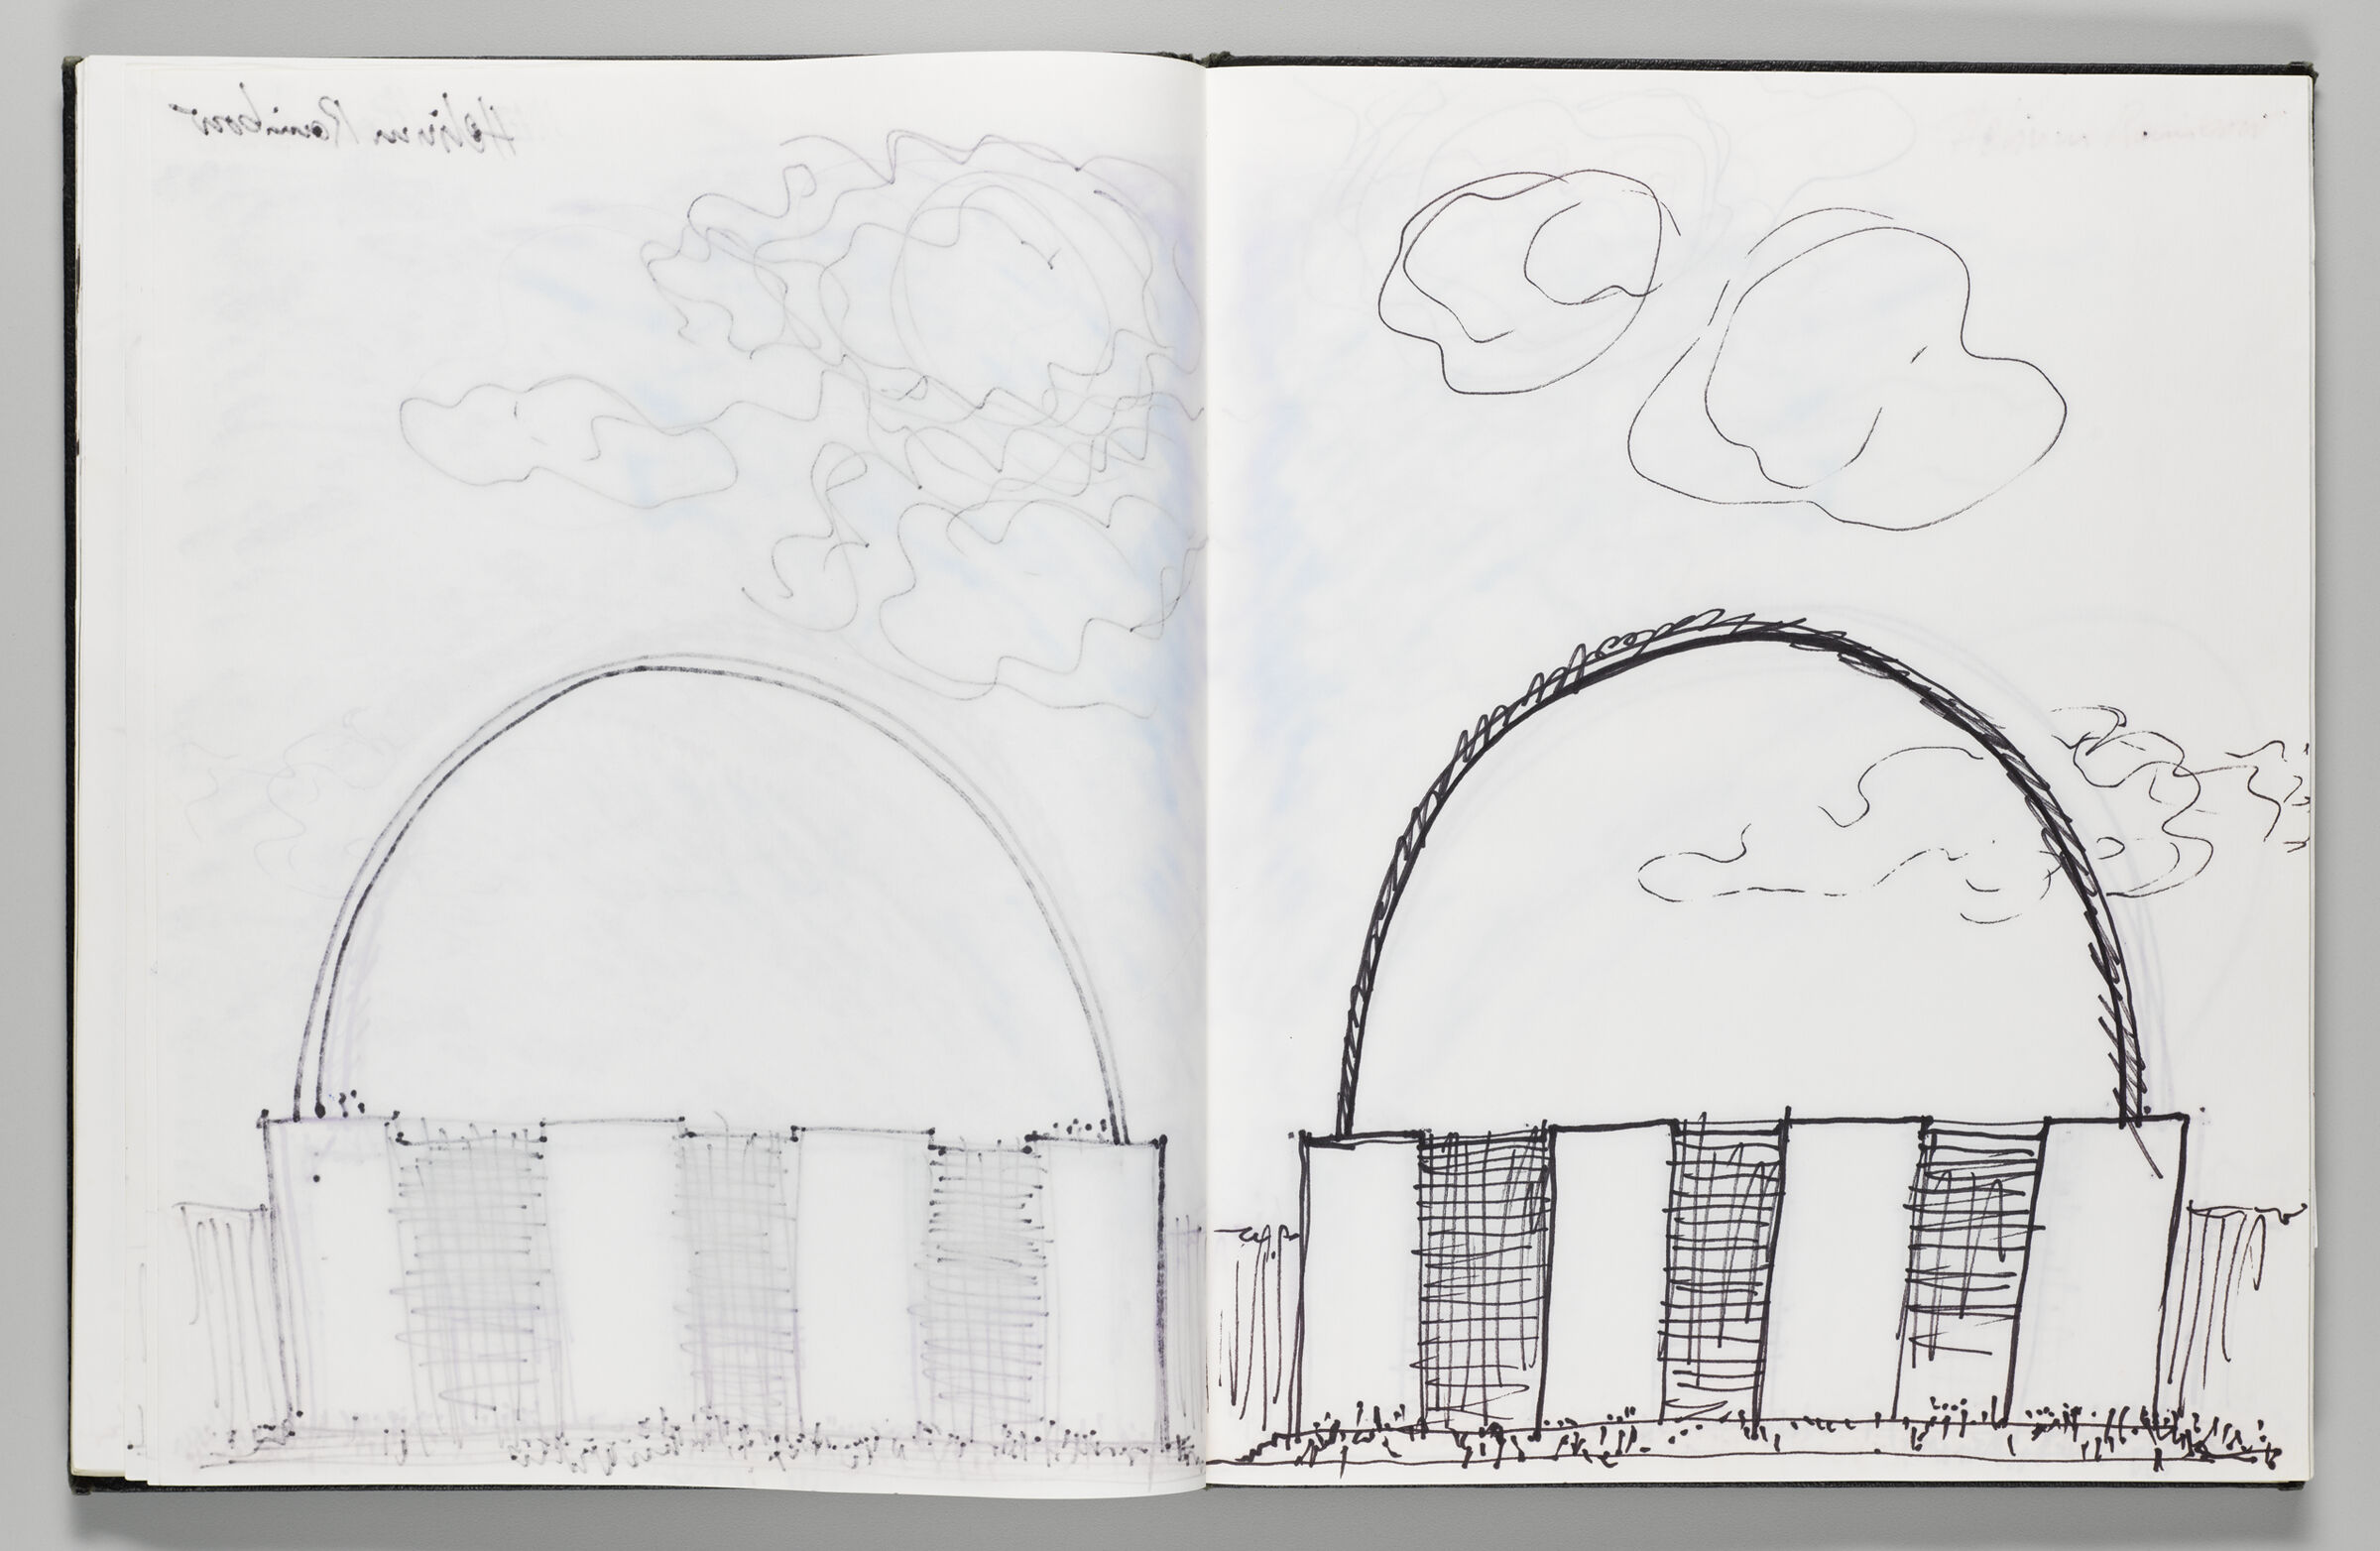 Untitled (Bleed-Through Of Previous Page And Color Transfer, Left Page); Untitled (Rainbow Inflatable, Right Page)